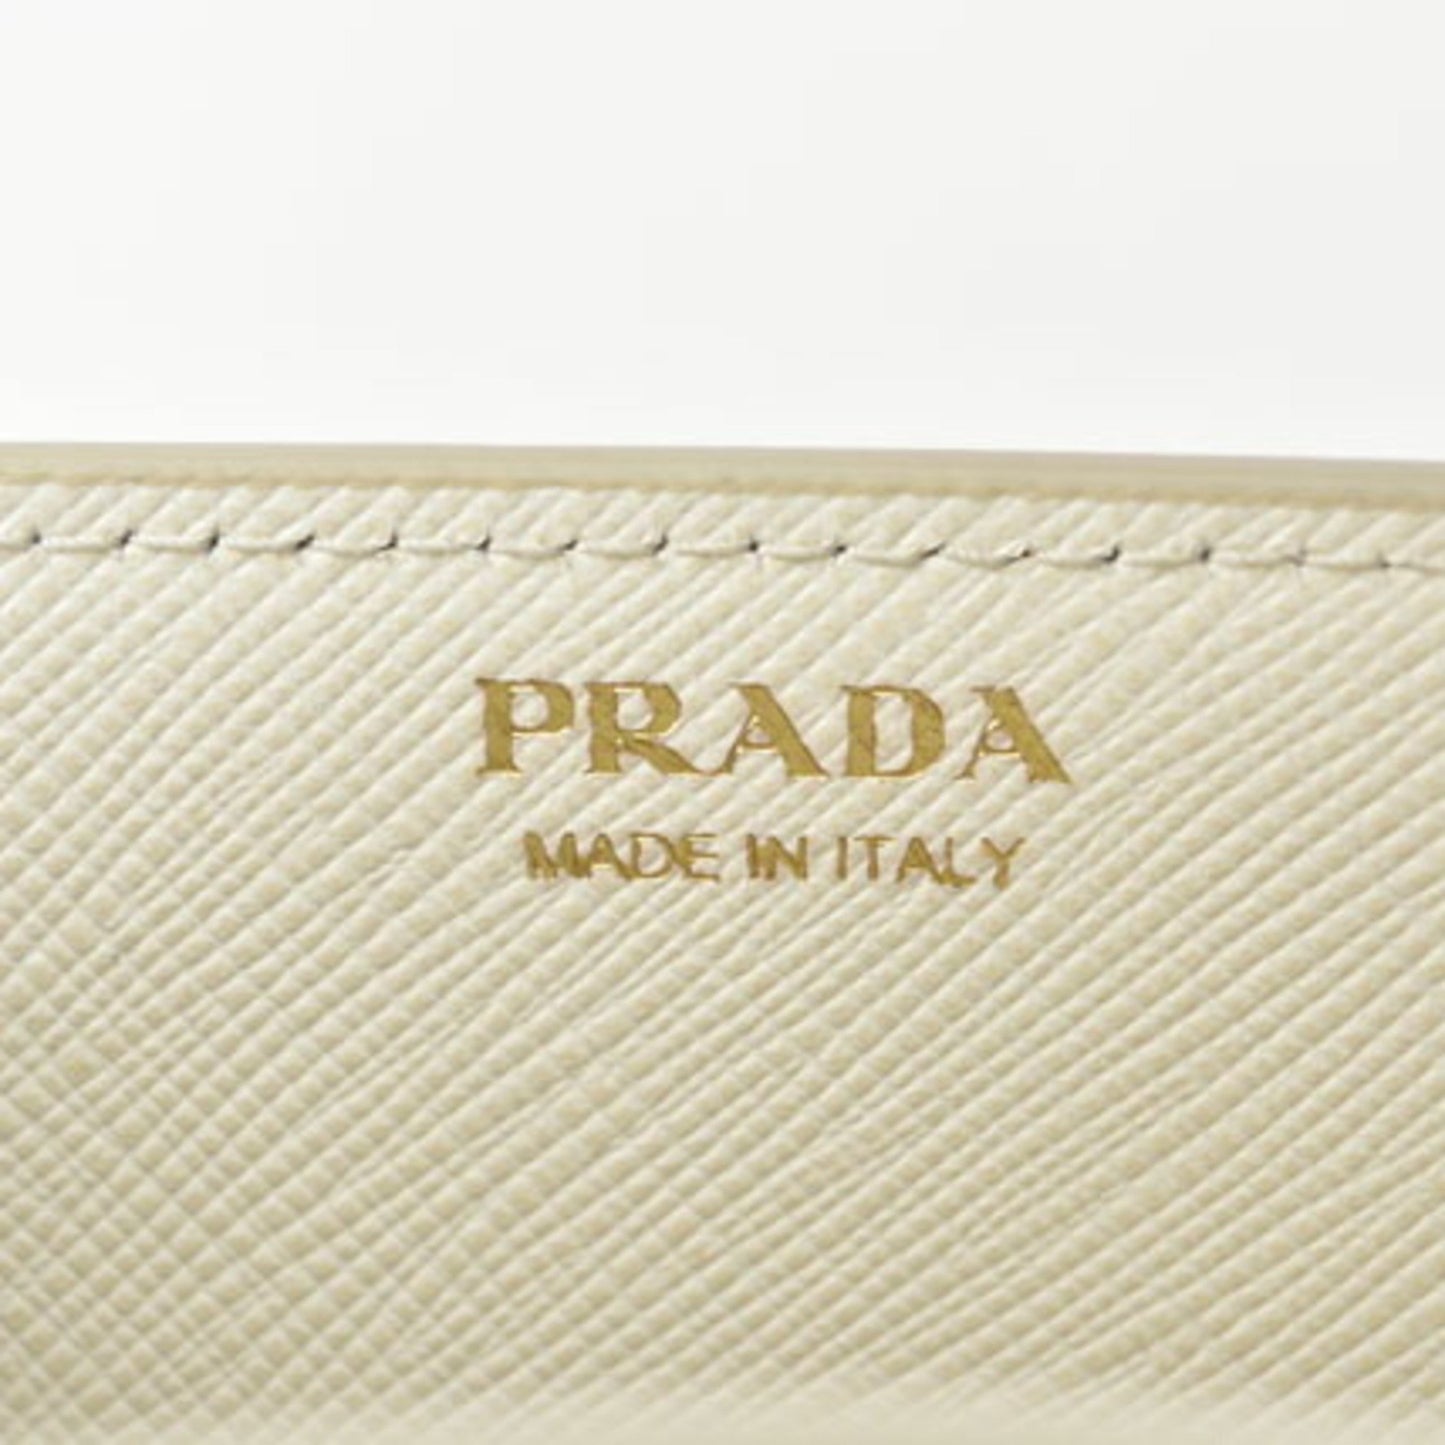 Prada Women's Chic White Leather Chain Wallet with Wallet Chain by Prada in White